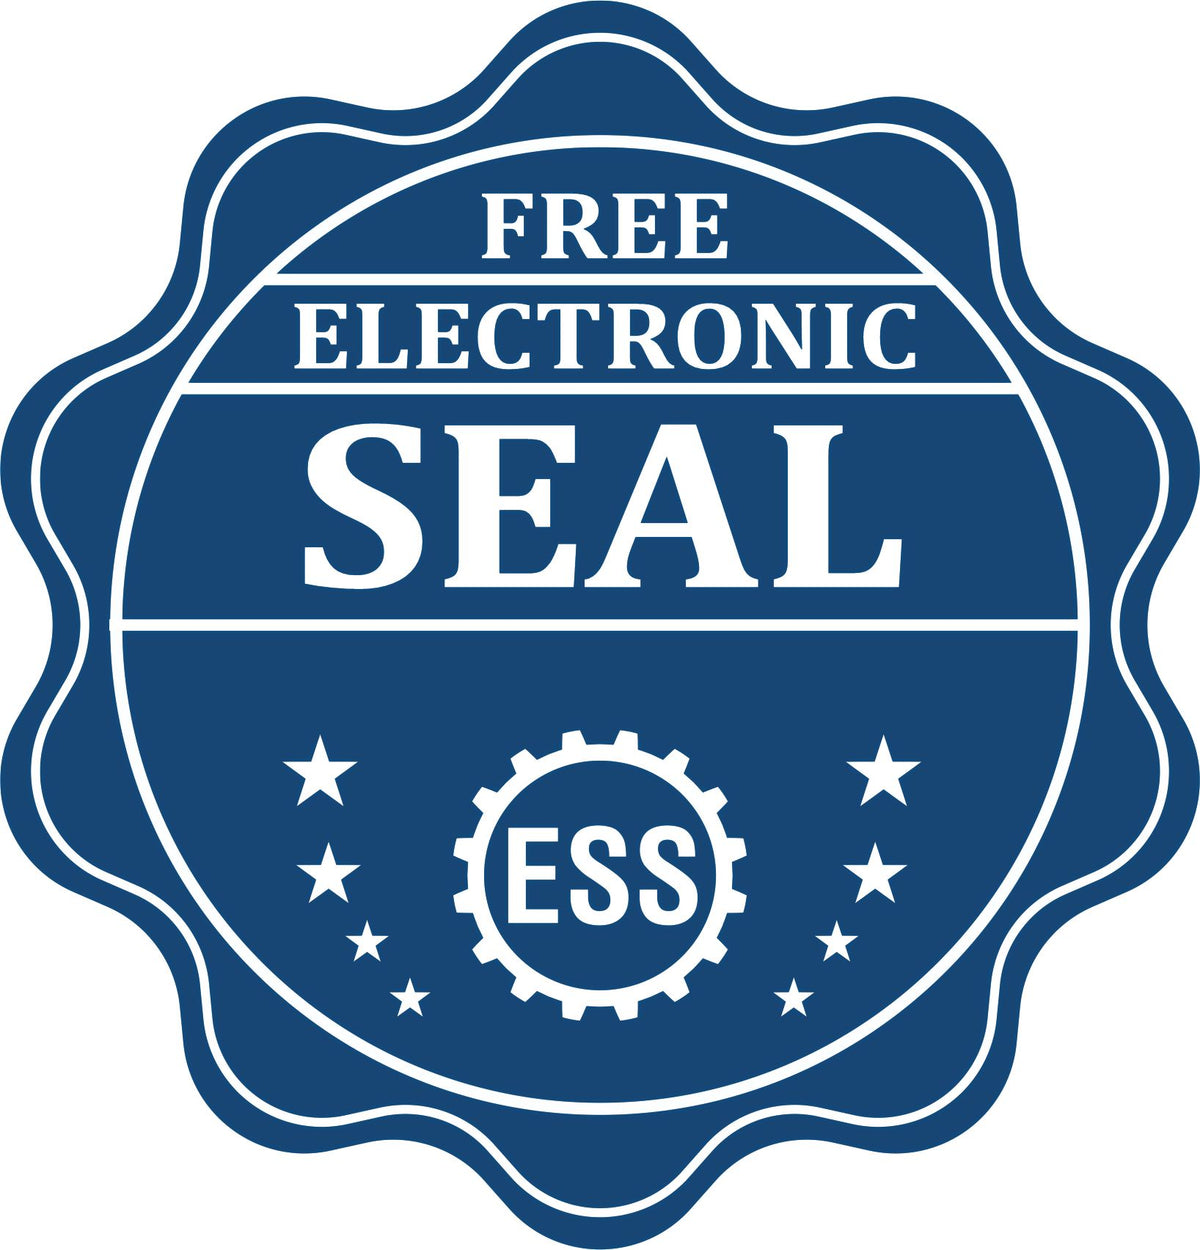 A badge showing a free electronic seal for the Gift Wyoming Geologist Seal with stars and the ESS gear on the emblem.